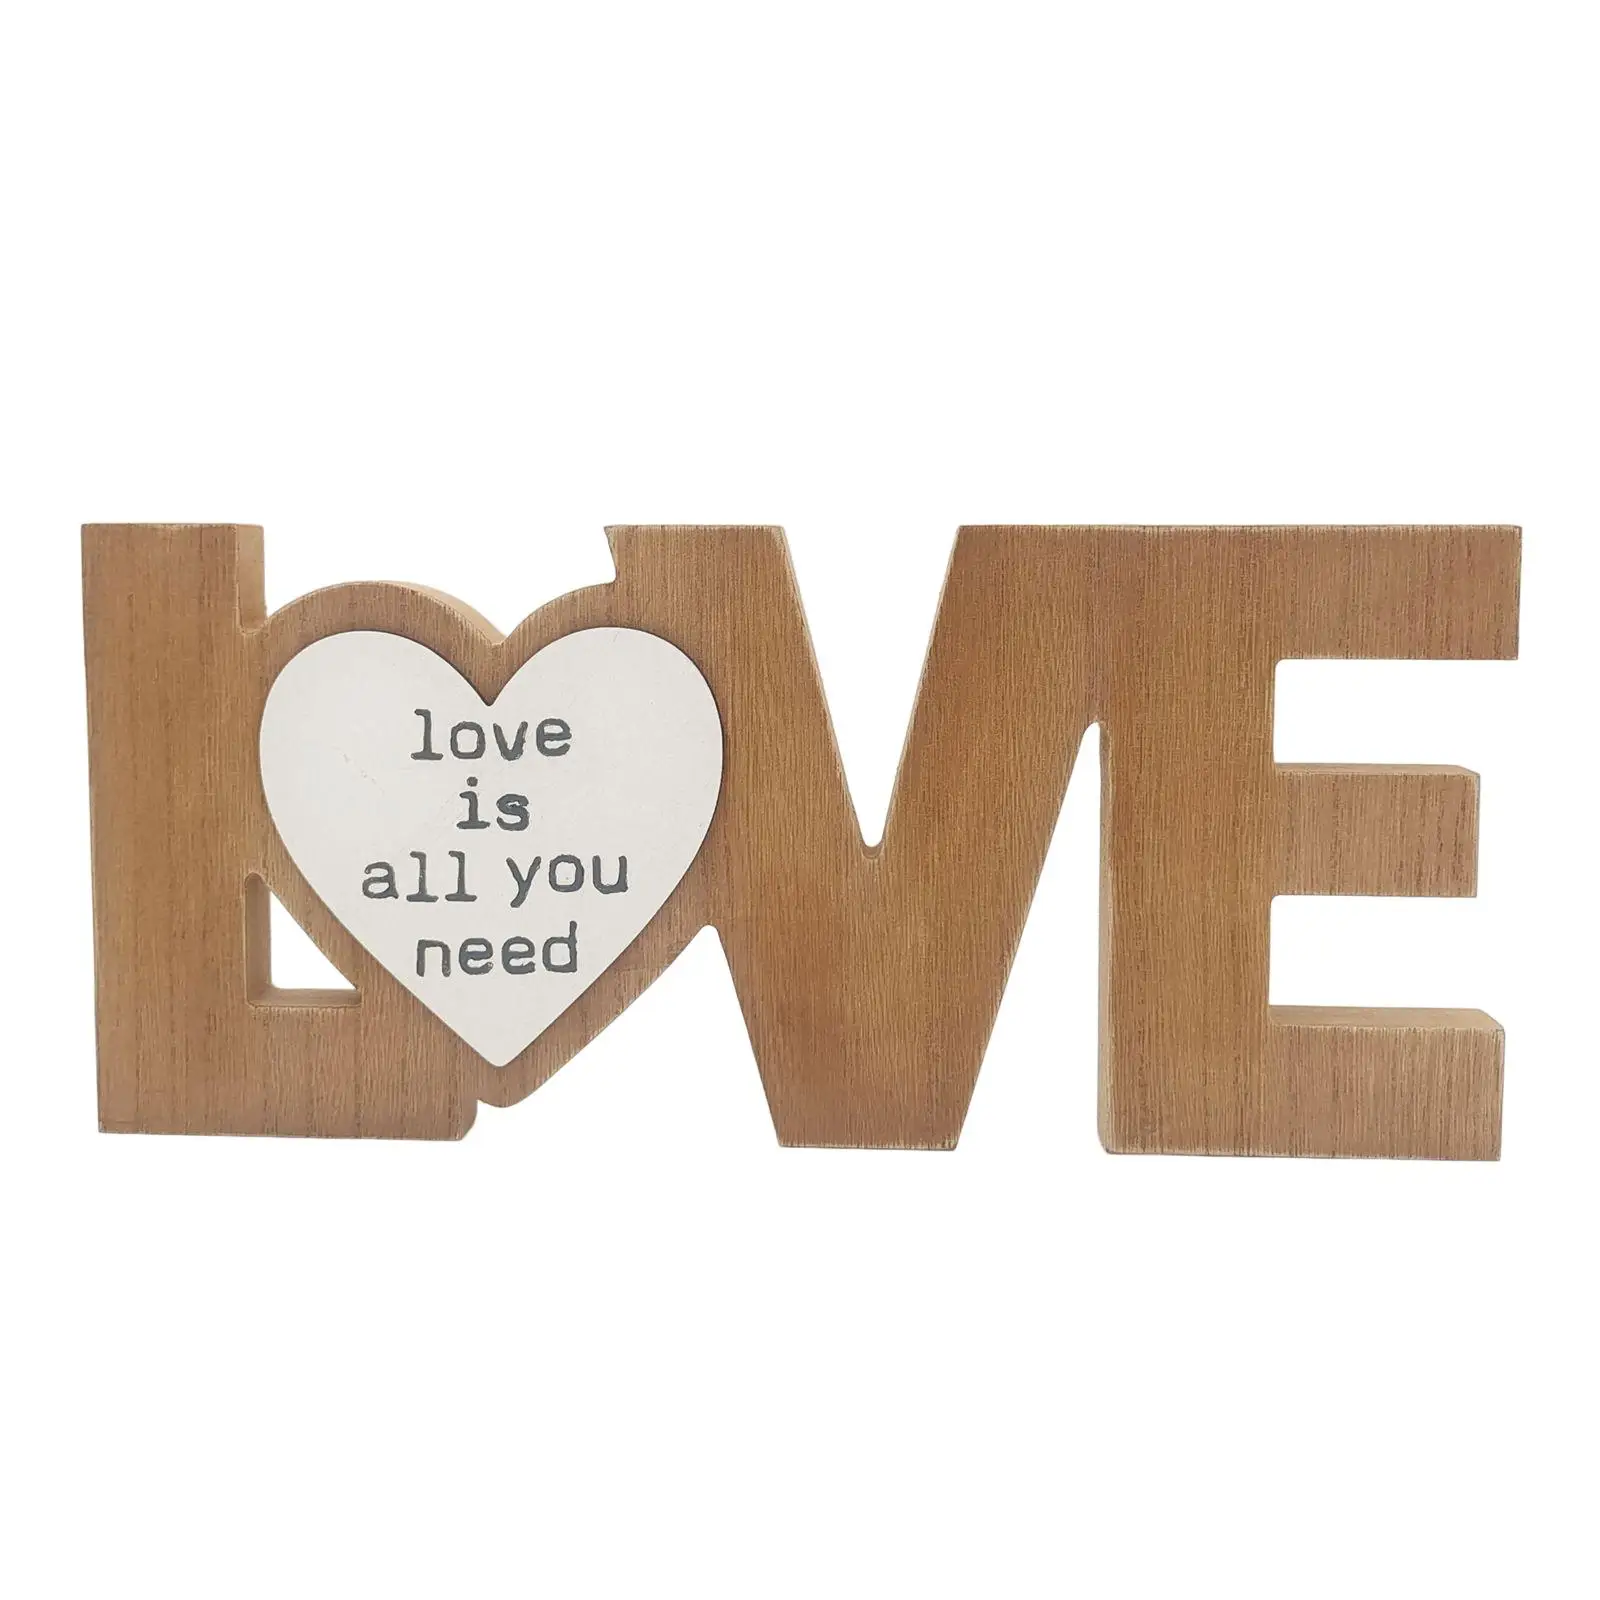 Rustic Wooden Love Words Decorative Sign Free Standing for Valentine`S Day Durable Measure 11.8x5.5x0.8inch Accessory Home Decor